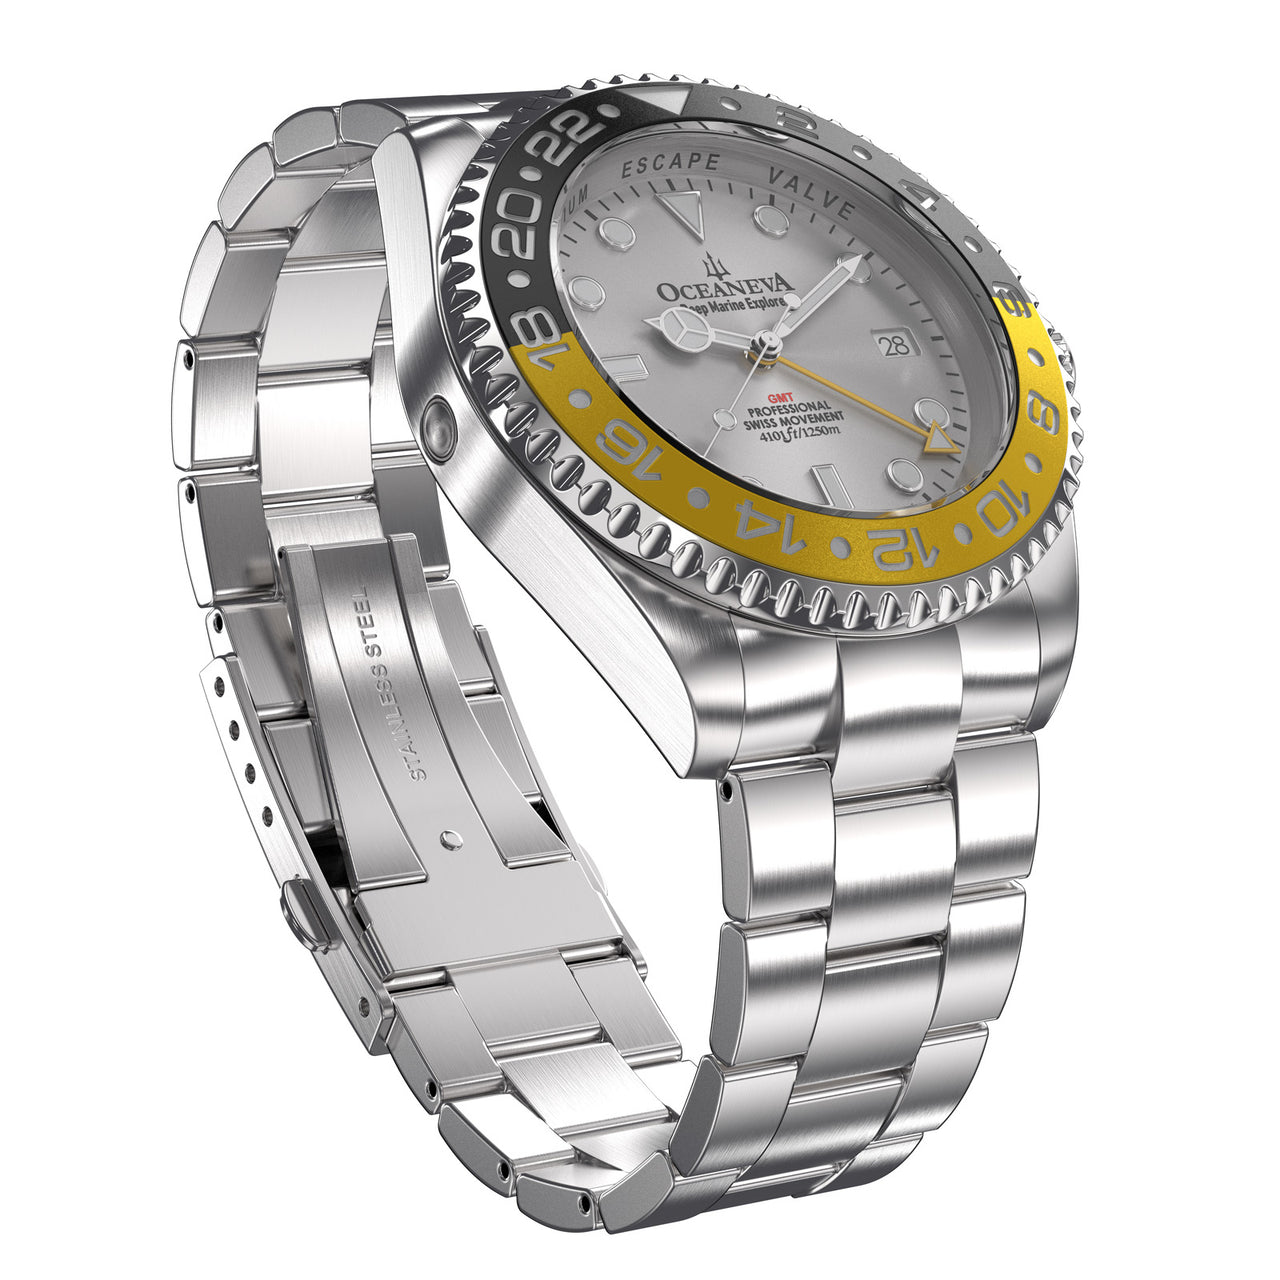 Oceaneva 1250M GMT Dive Watch Silver Black and Yellow Front Picture Slight Right Slant View